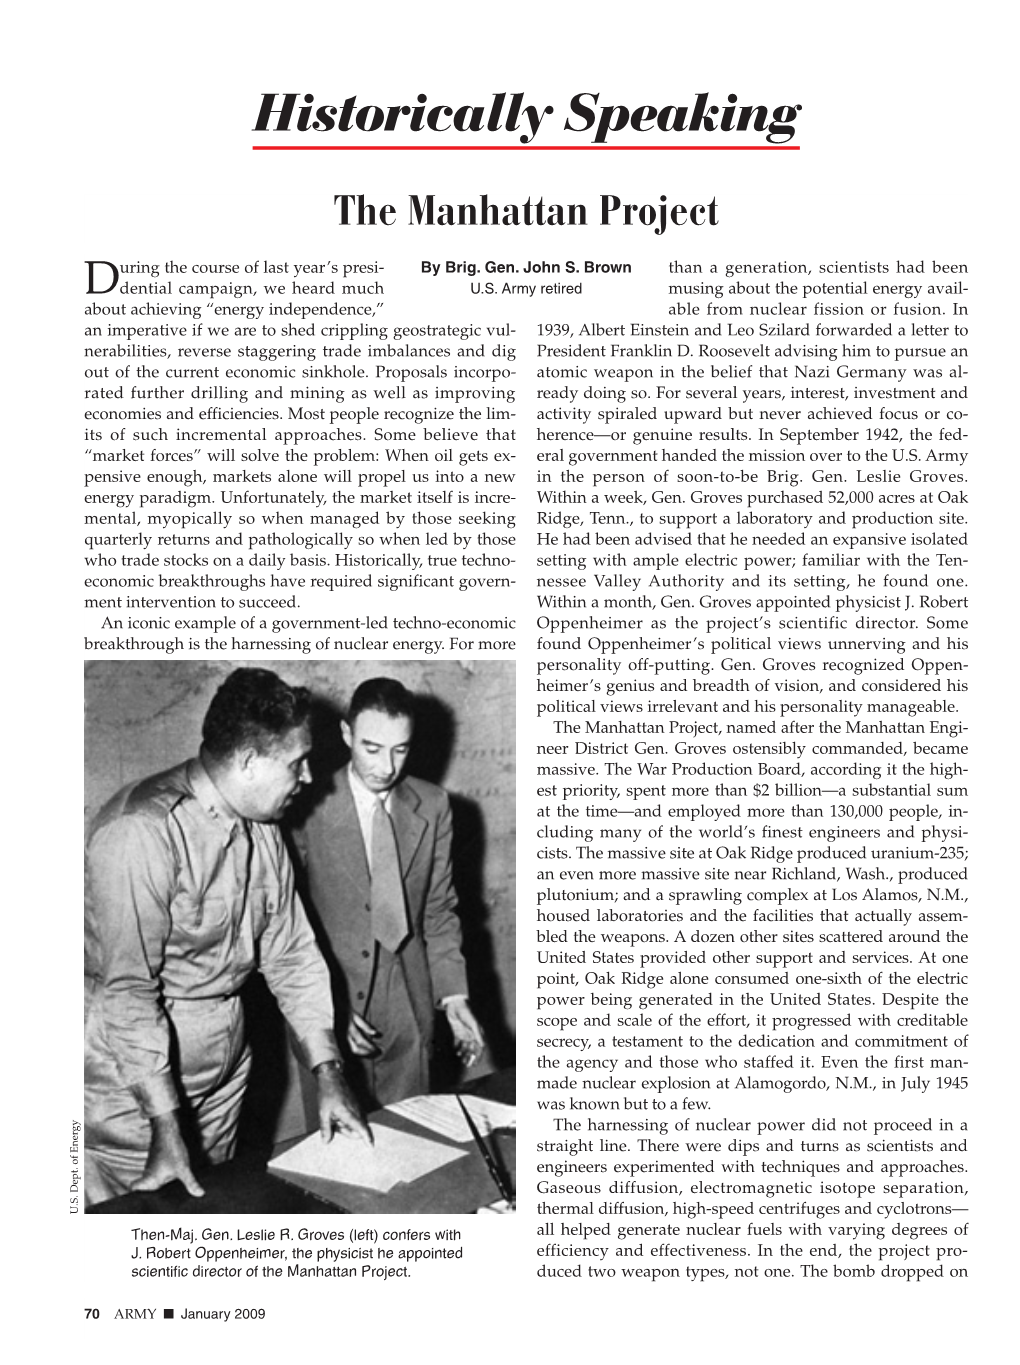 Historically Speaking the Manhattan Project